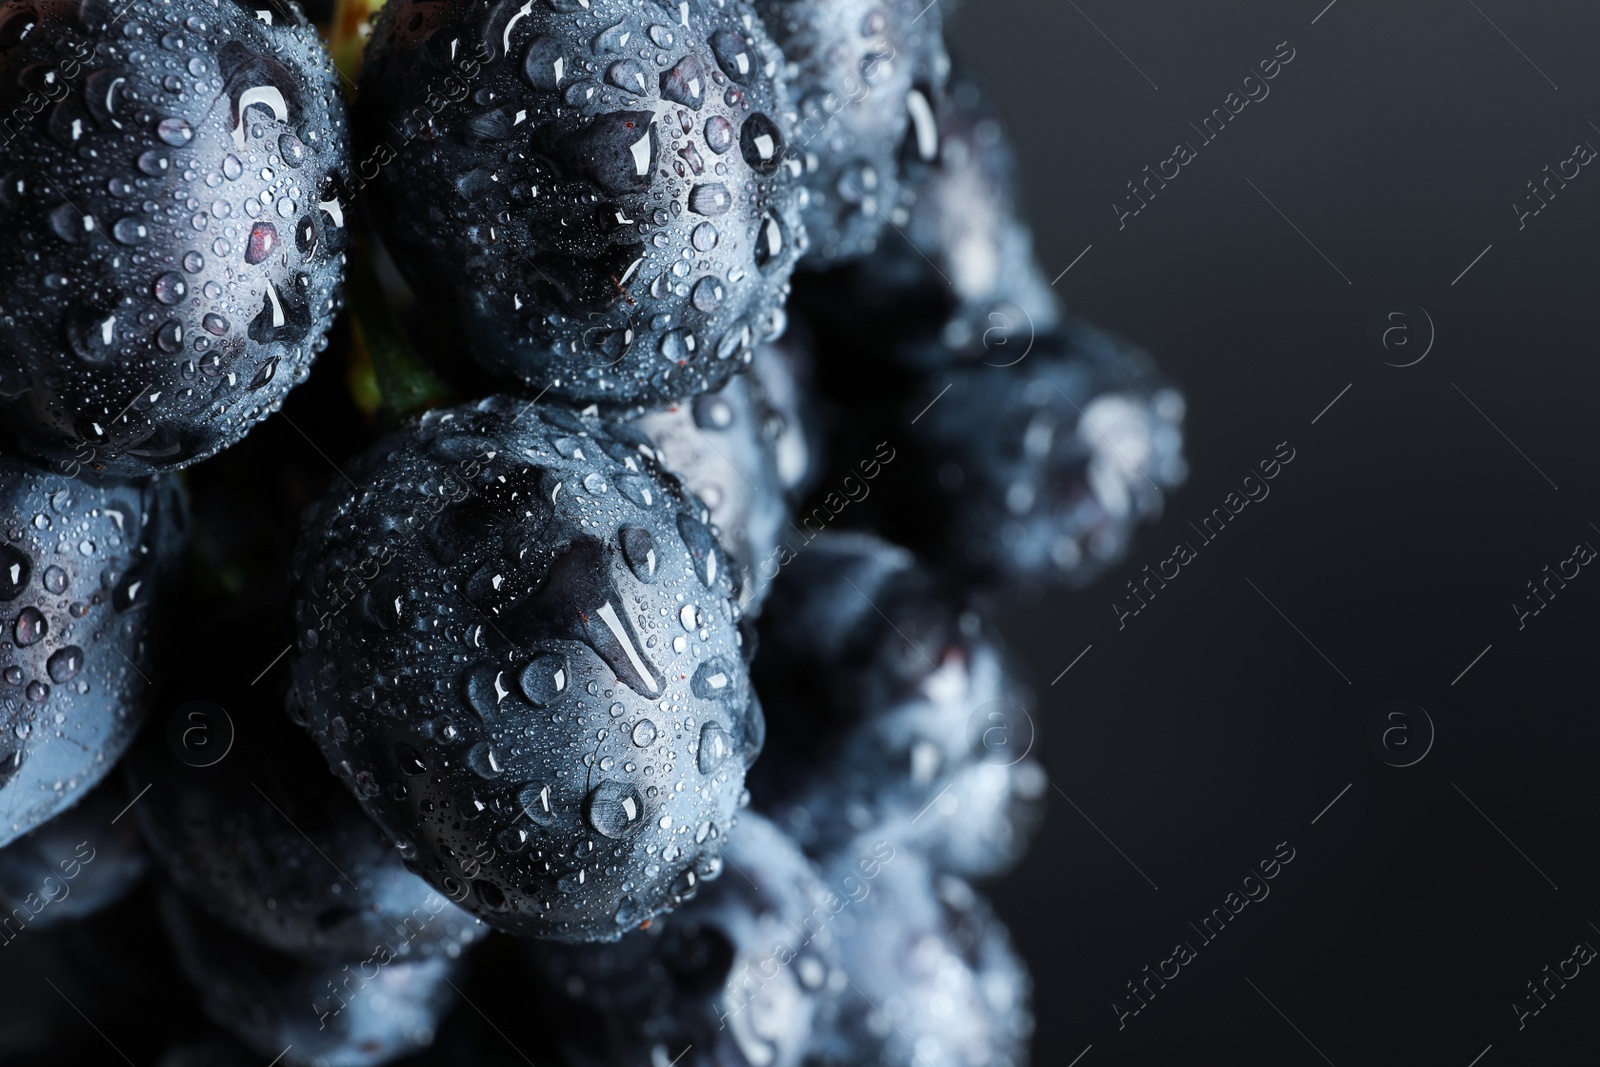 Photo of Bunch of fresh ripe juicy grapes as background, closeup